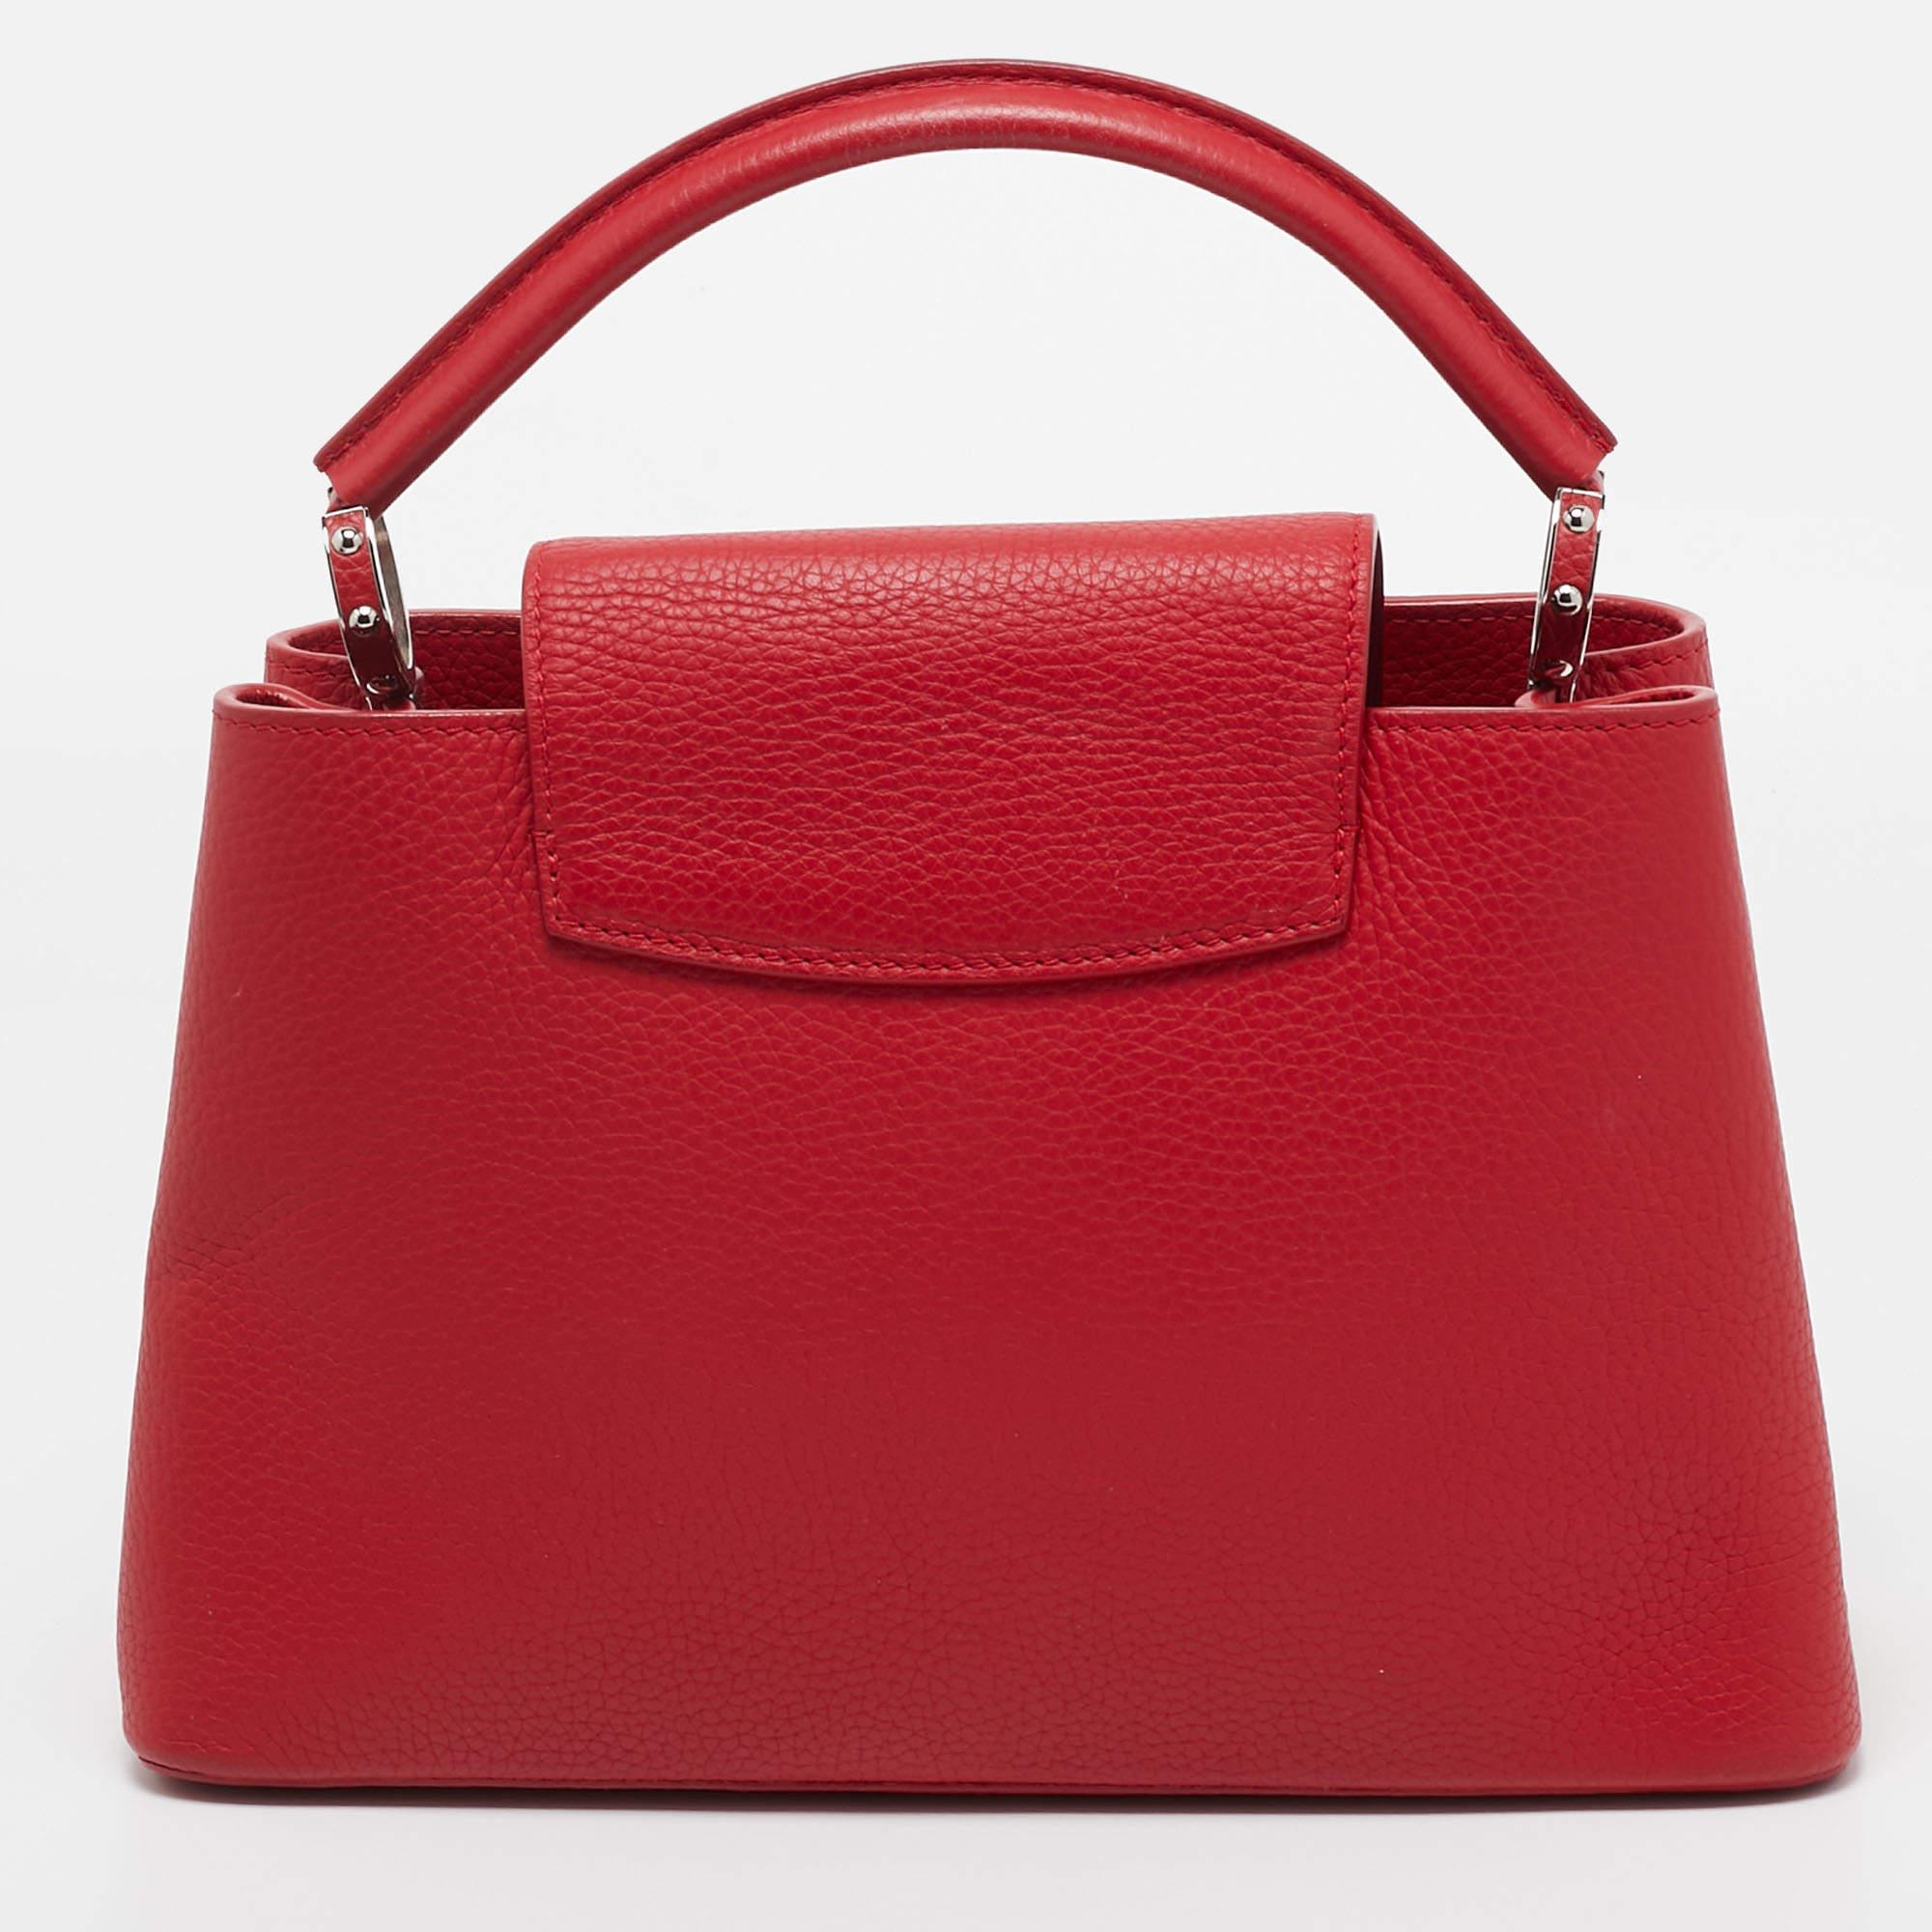 The Louis Vuitton Capucines bag is a luxurious accessory crafted from exquisite rubis red Taurillon leather. It features a sophisticated flap closure, double handles, and a distinctive LV monogram closure. The interior is lined with fine leather,